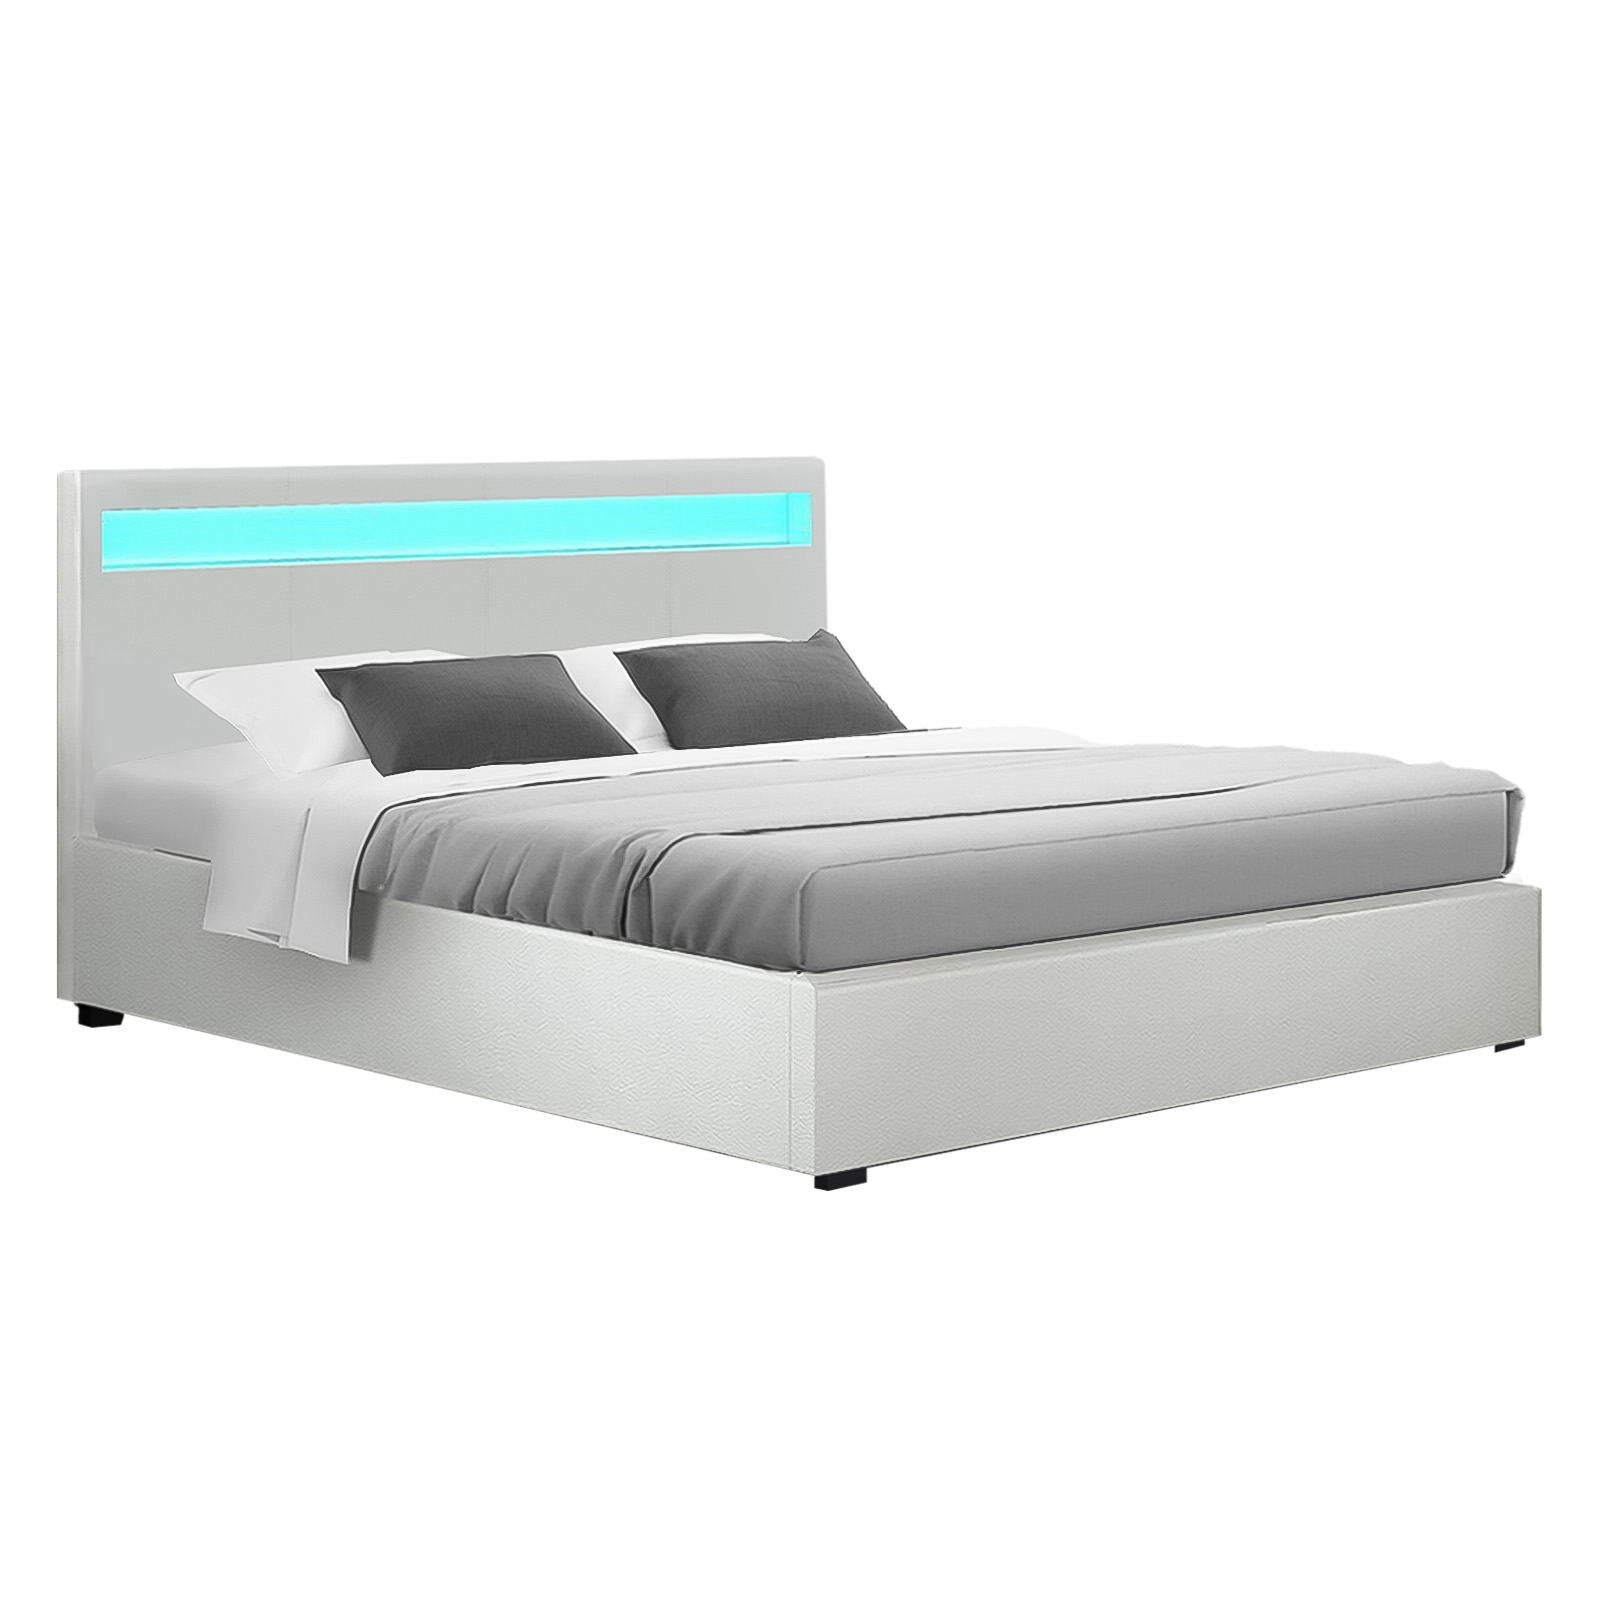 Artiss Bed Frame Double Size LED Gas Lift White COLE